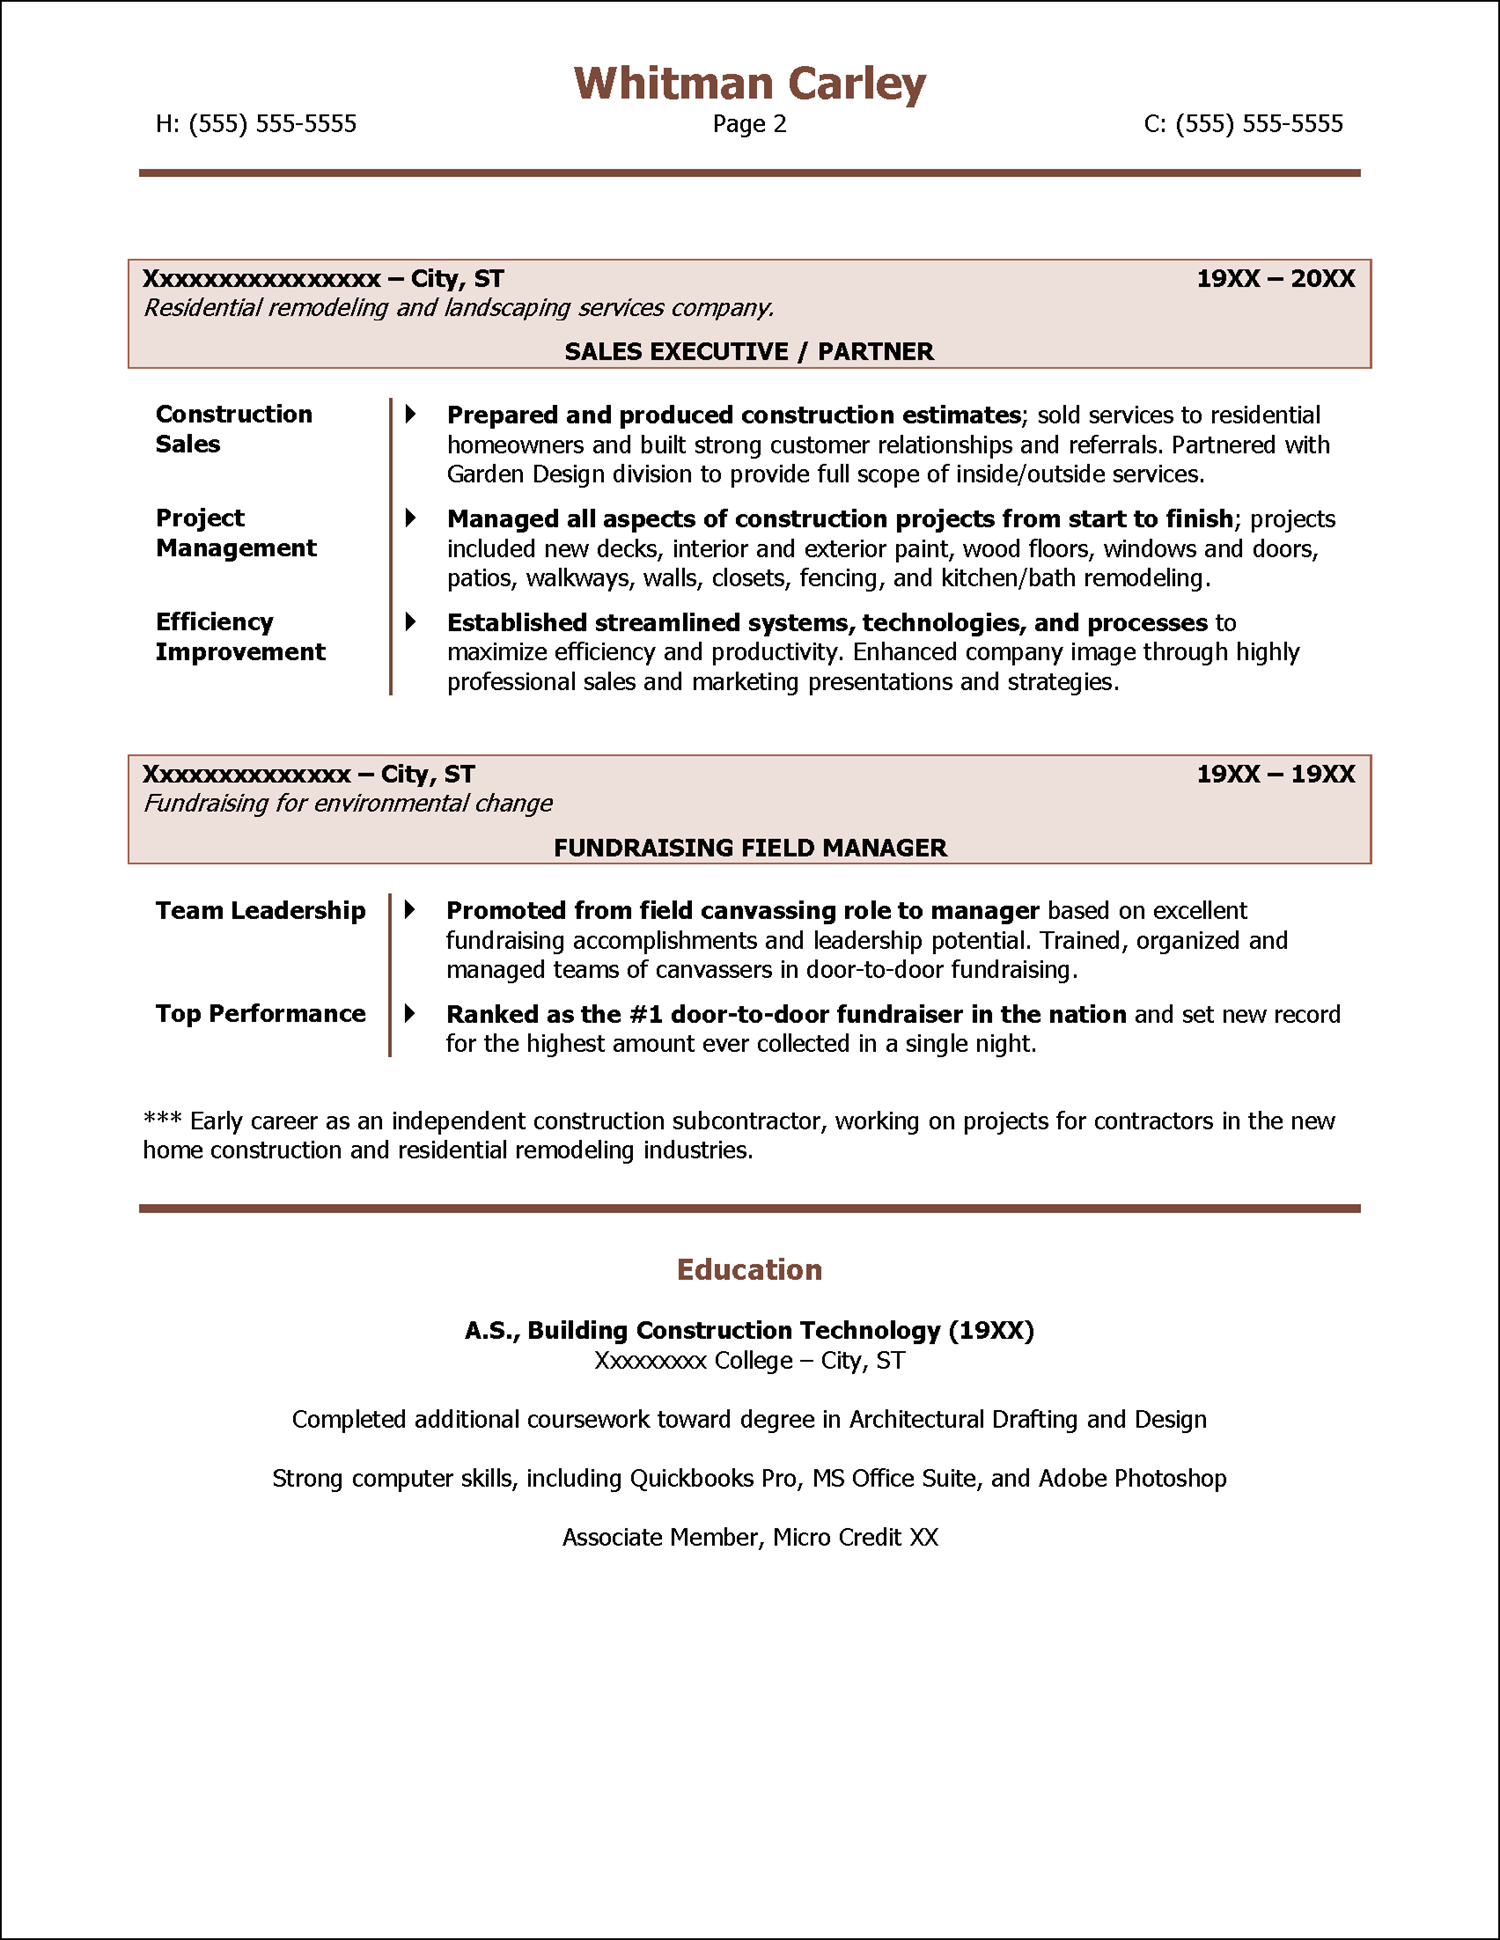 former business owner resume Page 2